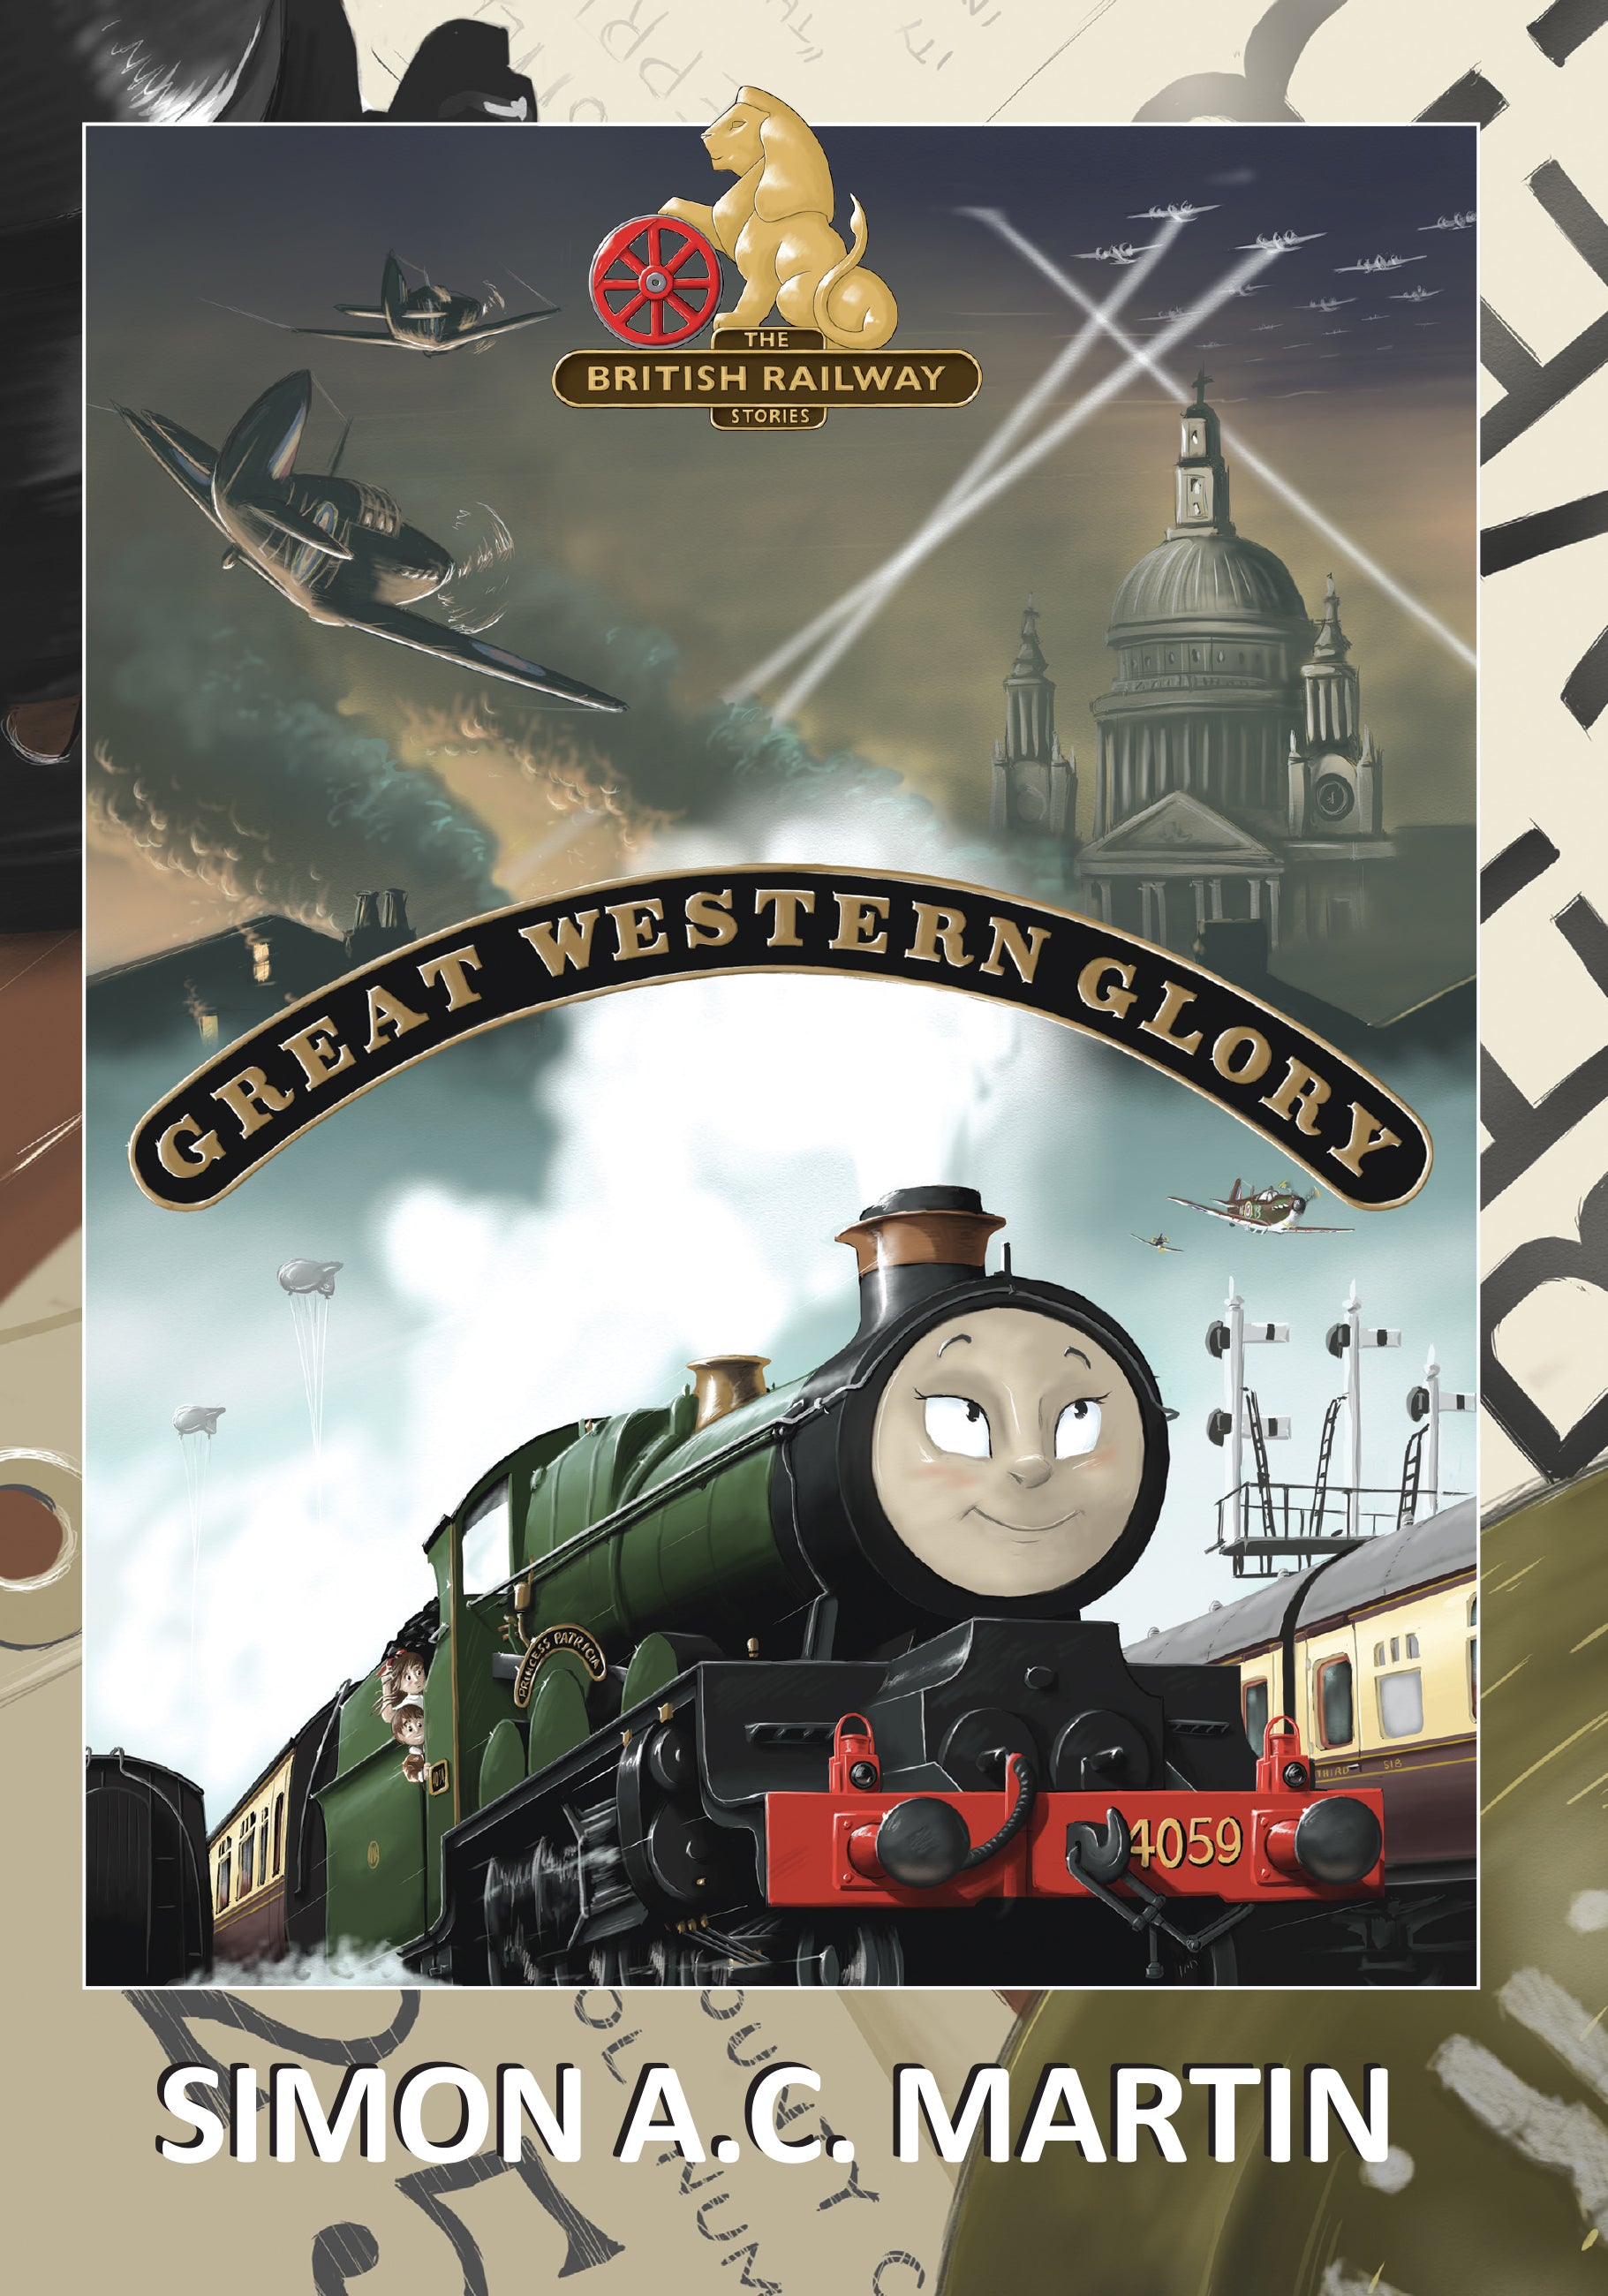 50% OFF the RRP £11.95 The British Railway Stories 2 - Great Western Glory